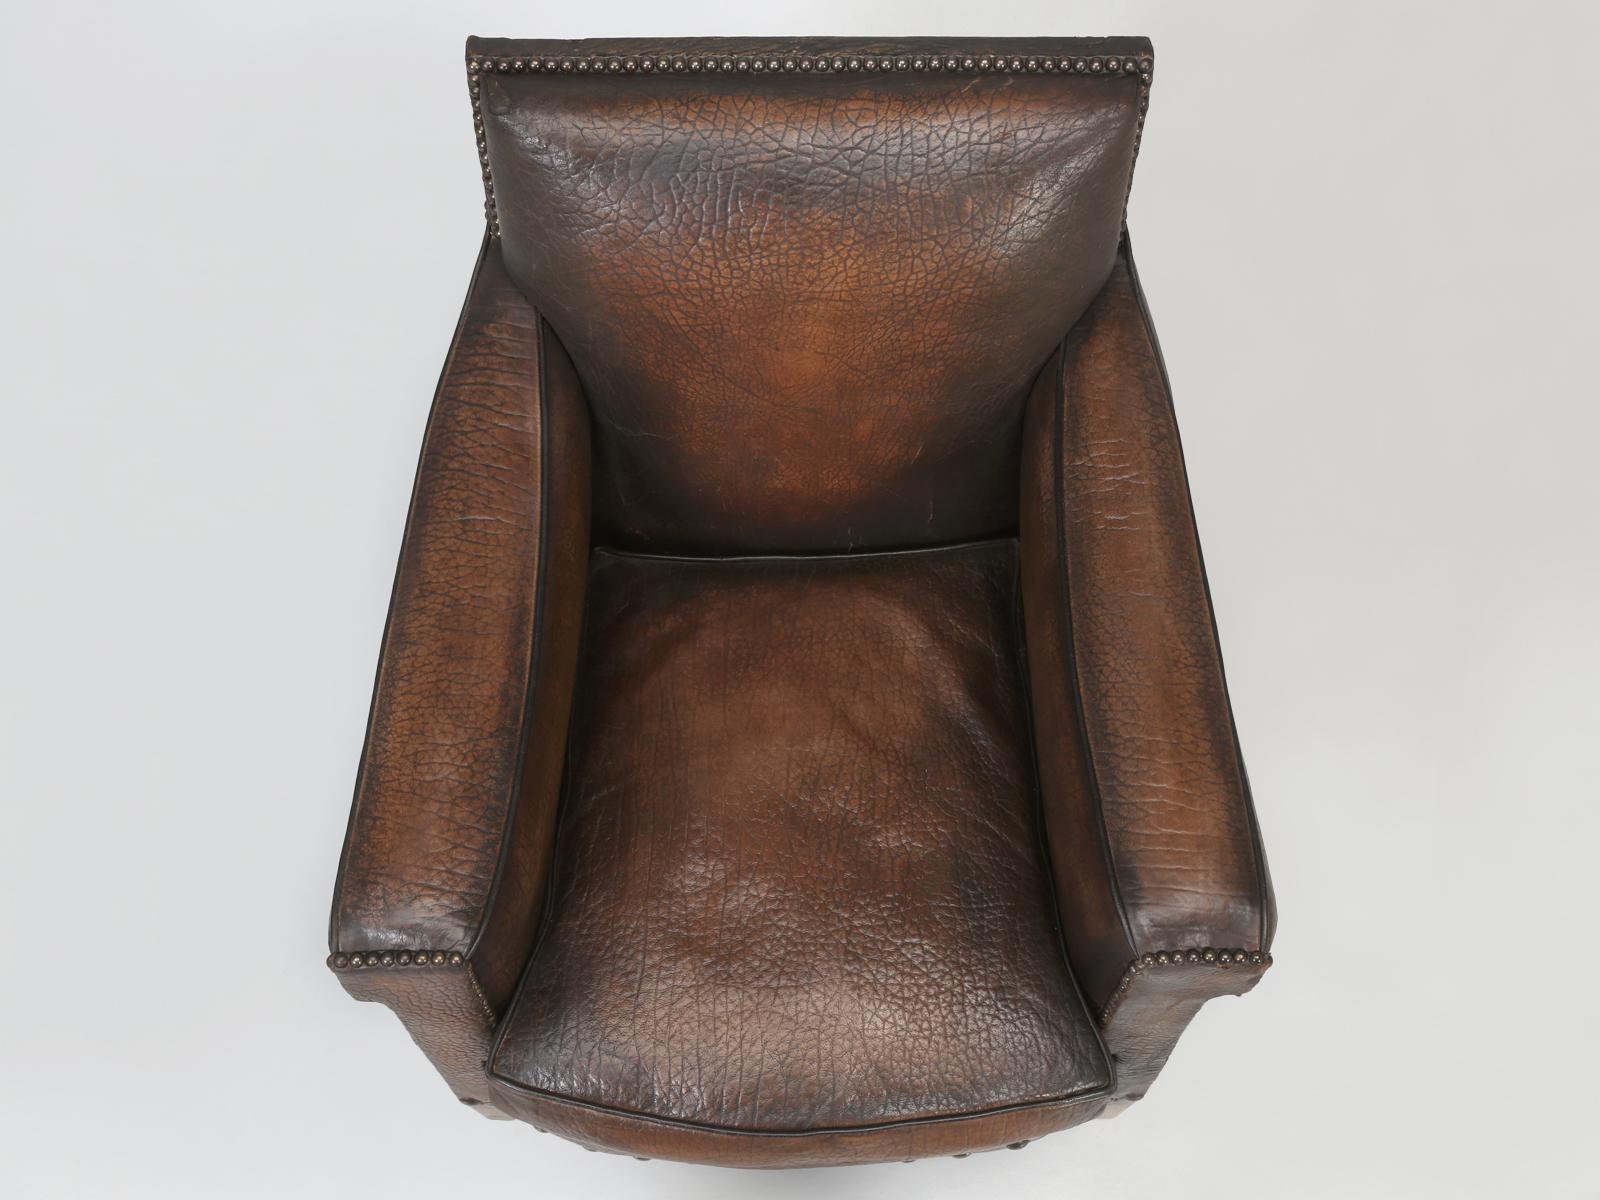 Hand-Crafted French Leather Club Chair in an Elephant Pattern Embossed Cowhide, Restored